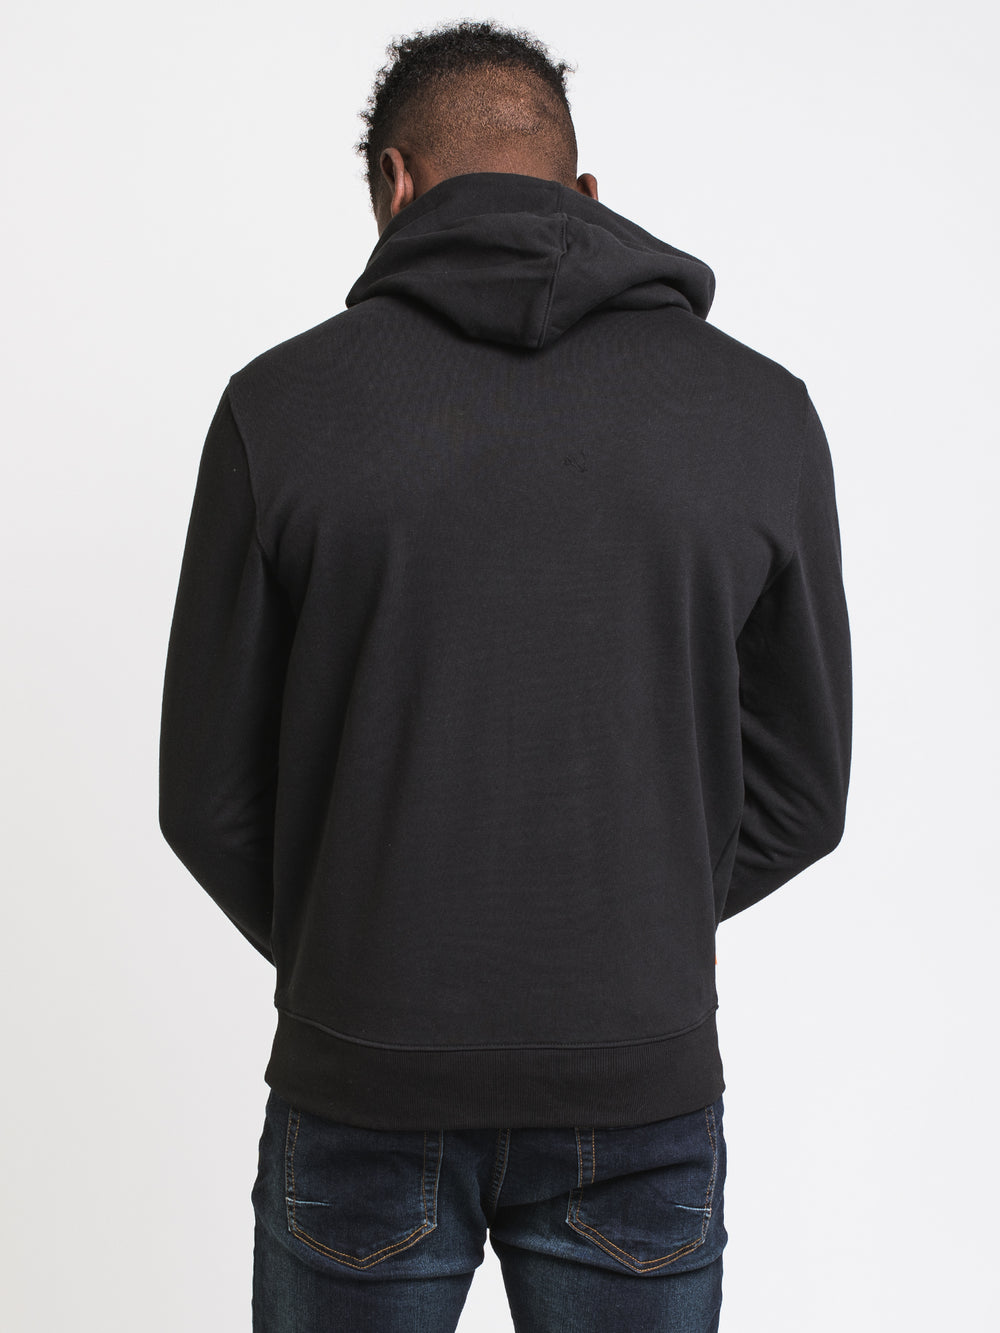 TIMBERLAND EST. 1973 PULLOVER HOODIE - CLEARANCE